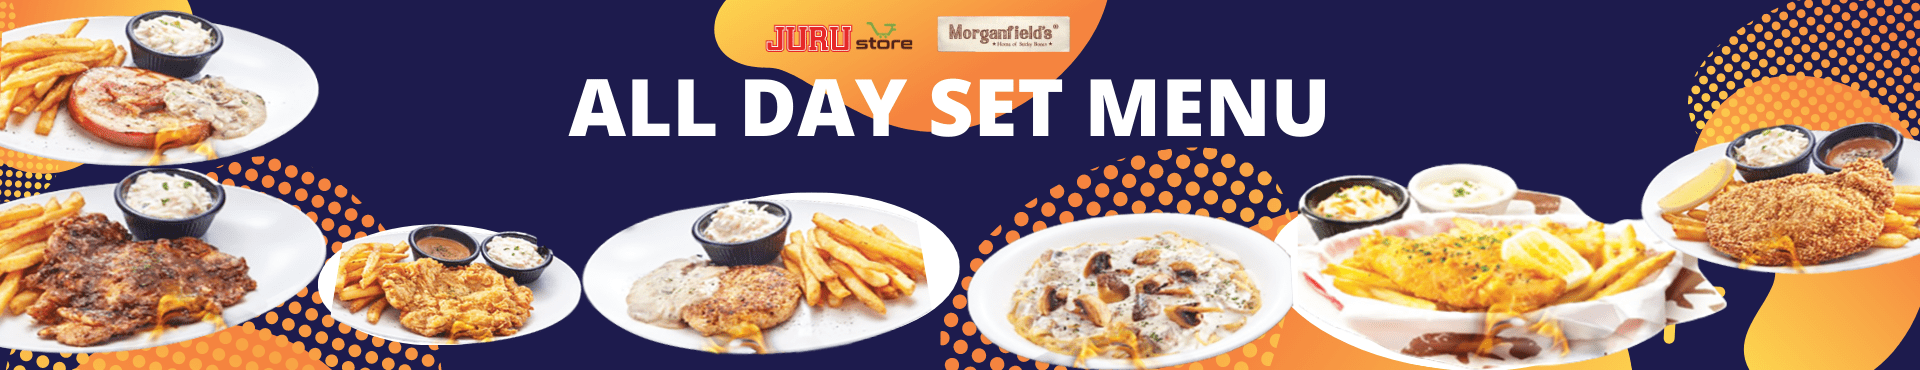 Morganfield’s All Day Set Menu Delivery